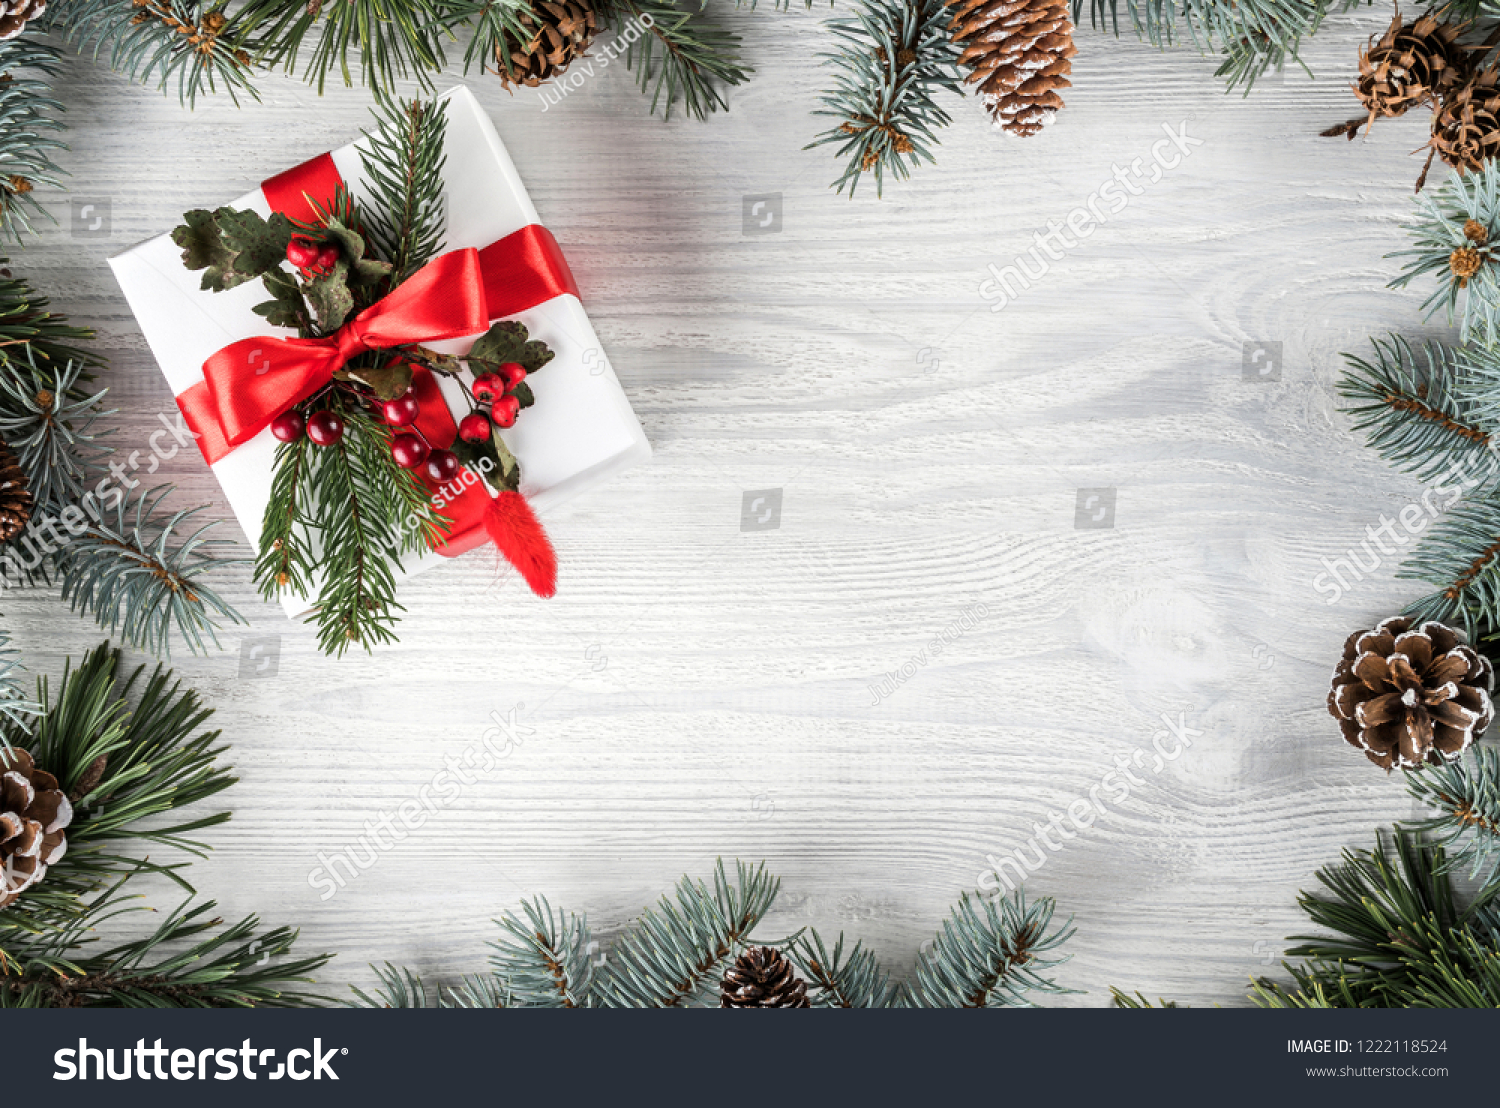 Creative frame made of Christmas fir branches on white wooden background with gift box, pine cones. Xmas and New Year theme. Flat lay, top view #1222118524